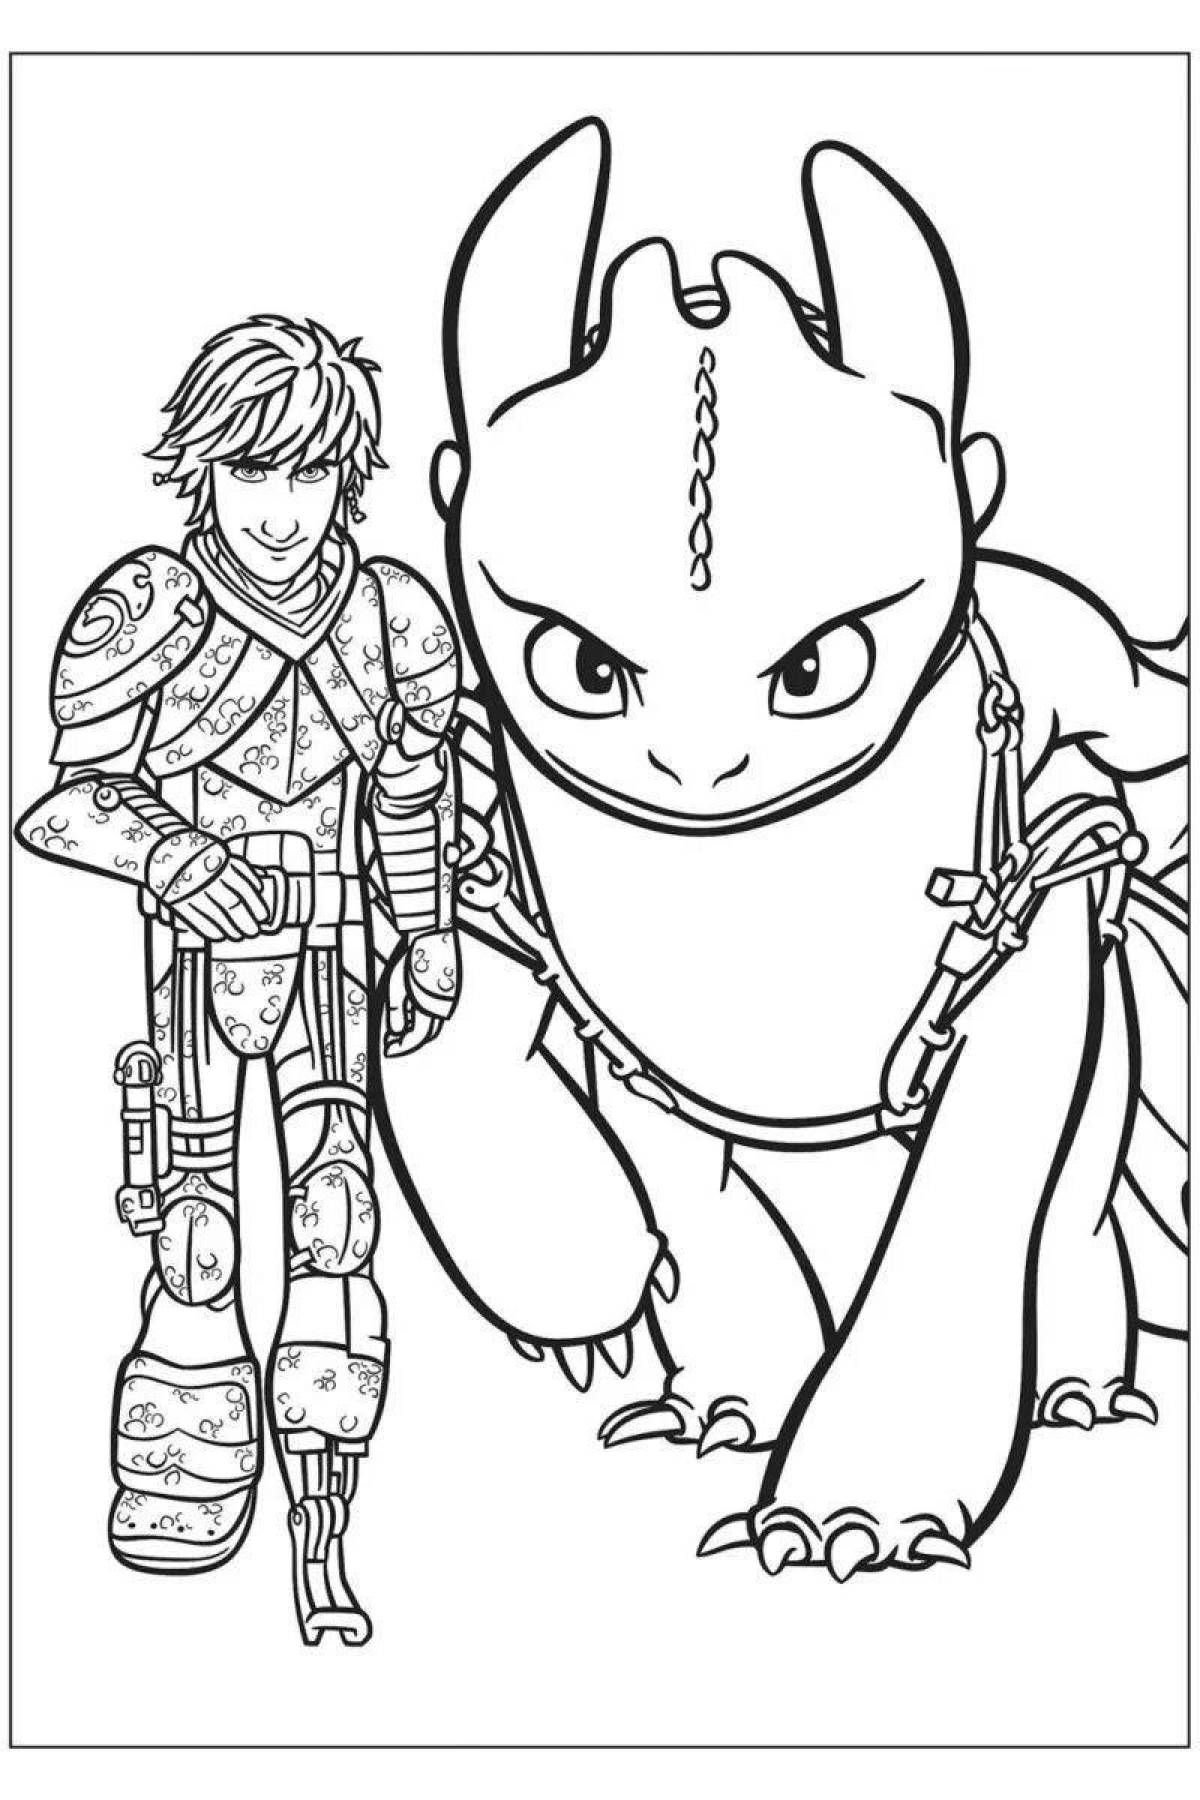 Fantastic toothless coloring book